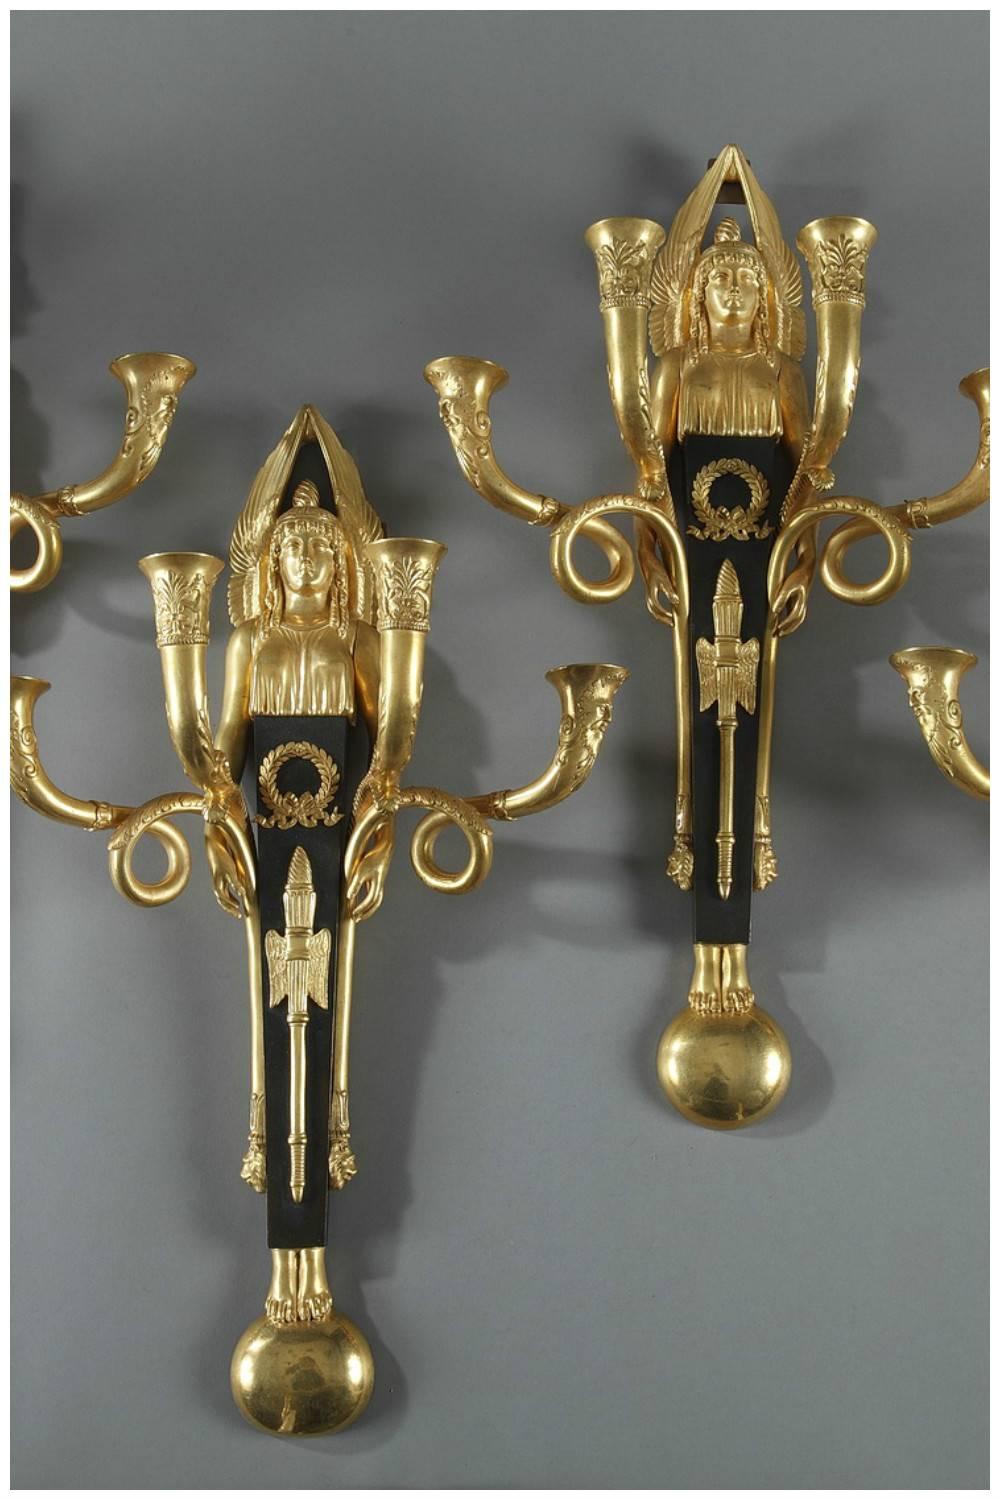 Pair of gilt and patinated bronze sconces from embellished with winged Victories. Each sconce features four candlestick branches that terminate in lions heads and are intricately sculpted with palmettes, griffons, and masks. The gilt bronze bust of